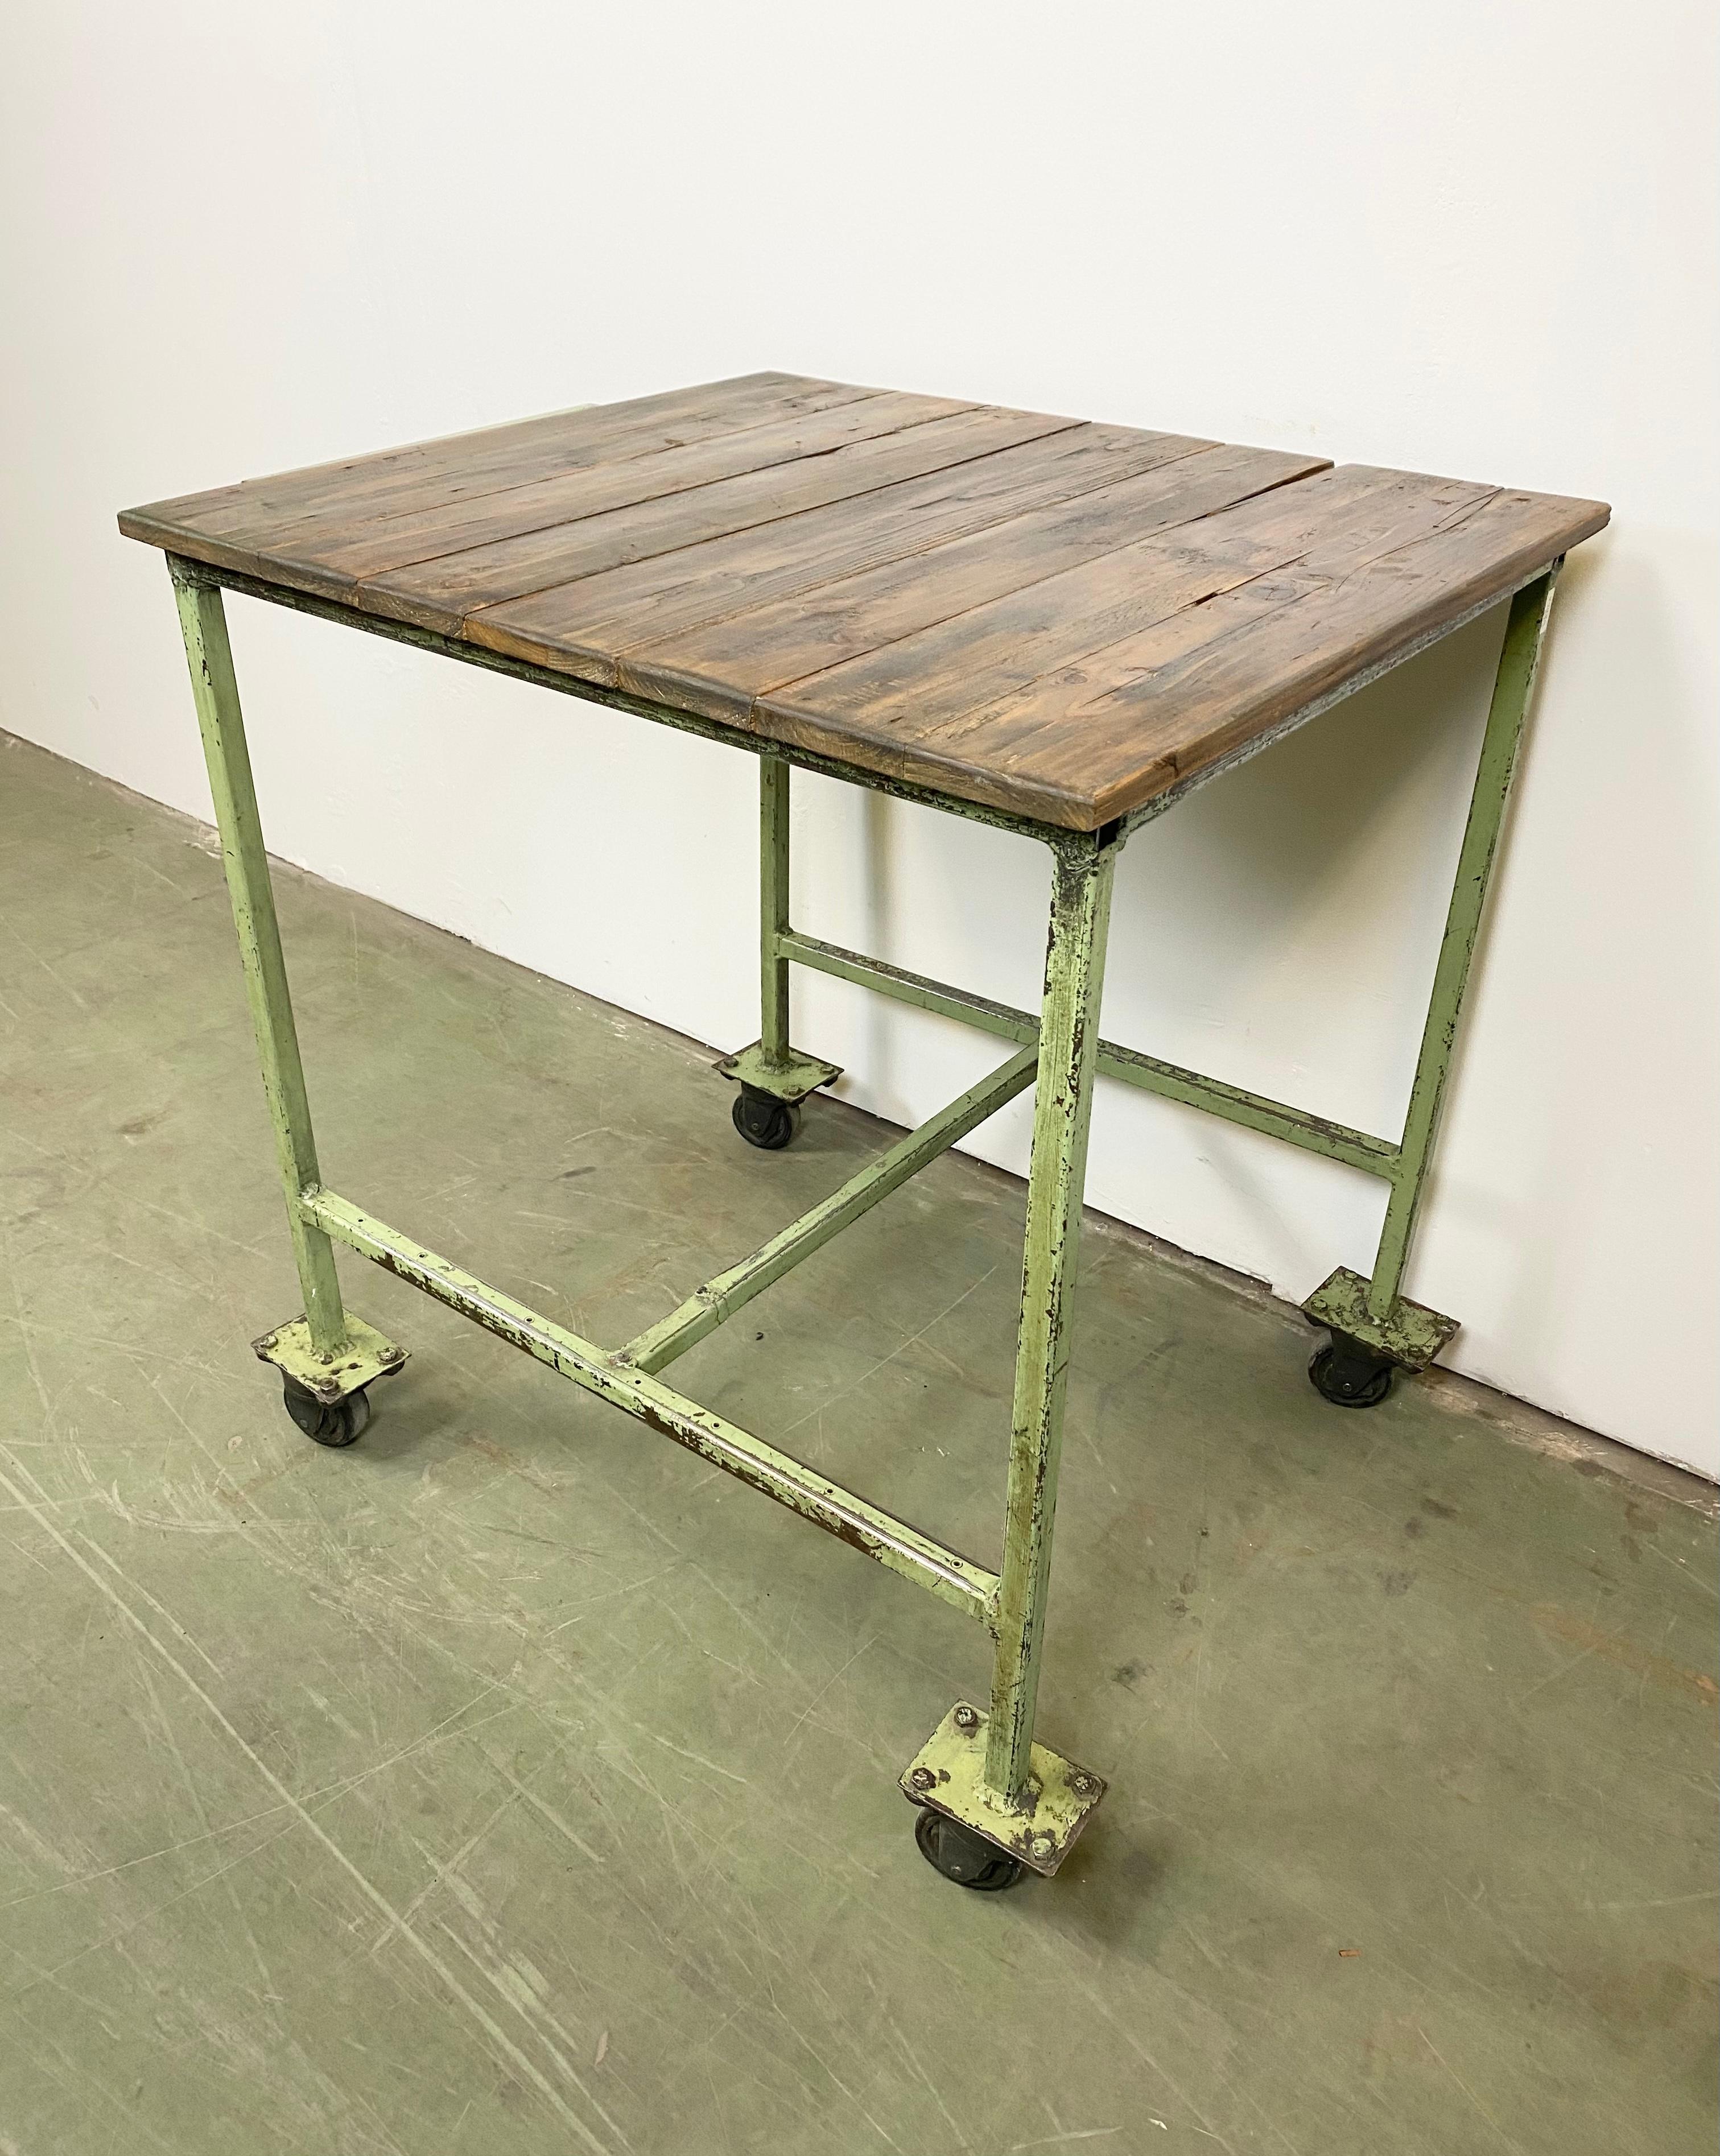 Industrial trolley from 1960s. It features an iron construction with four wheels and wooden top. Good vintage condition. Weight: 38 kg.